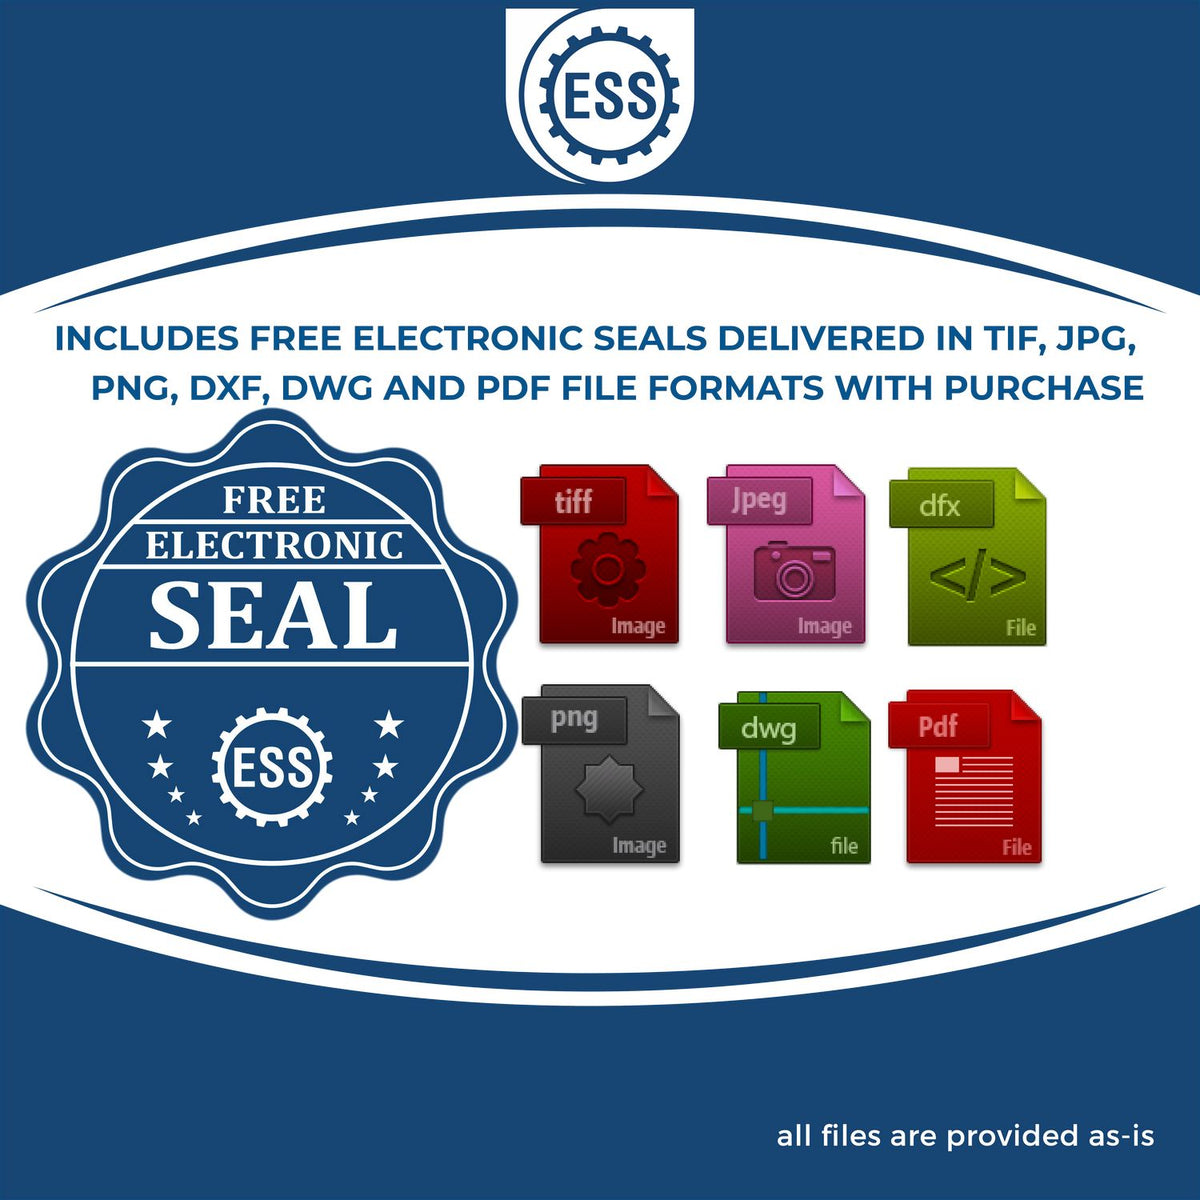 An infographic for the free electronic seal for the Premium MaxLight Pre-Inked New Jersey Geology Stamp illustrating the different file type icons such as DXF, DWG, TIF, JPG and PNG.